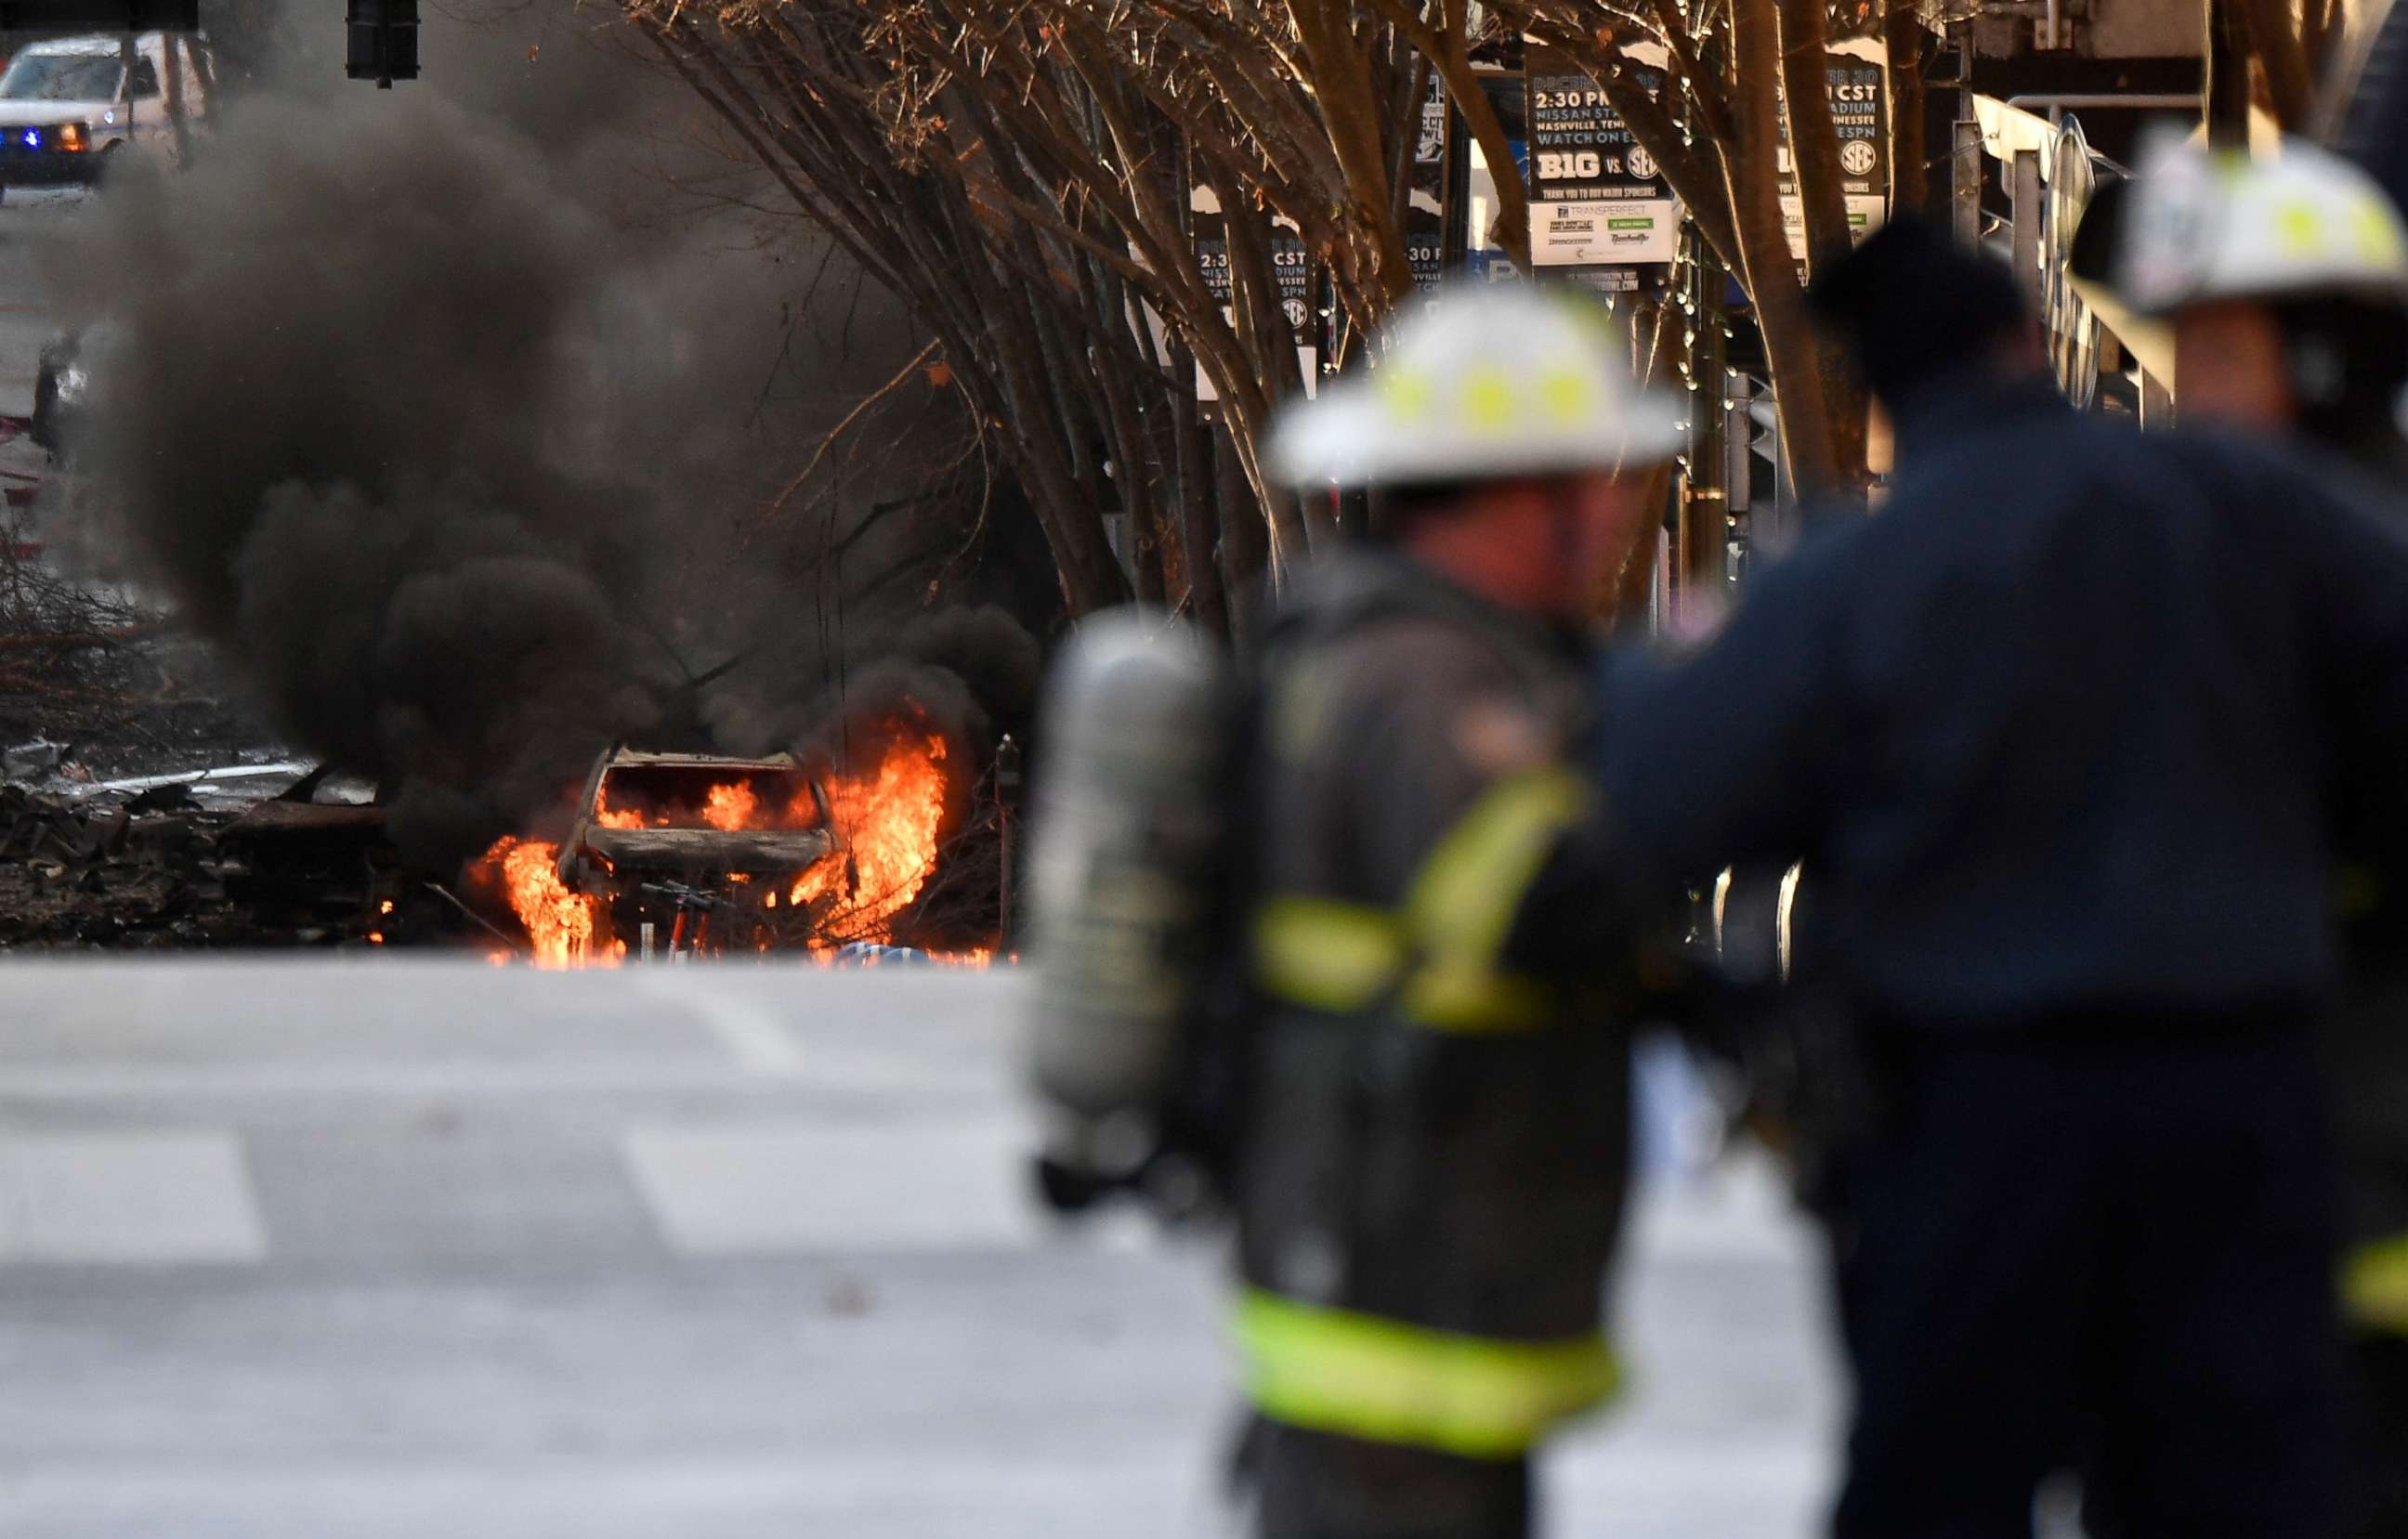 PHOTO: A vehicle burns near the site of an explosion in the area of Second and Commerce in Nashville, Dec. 25, 2020.